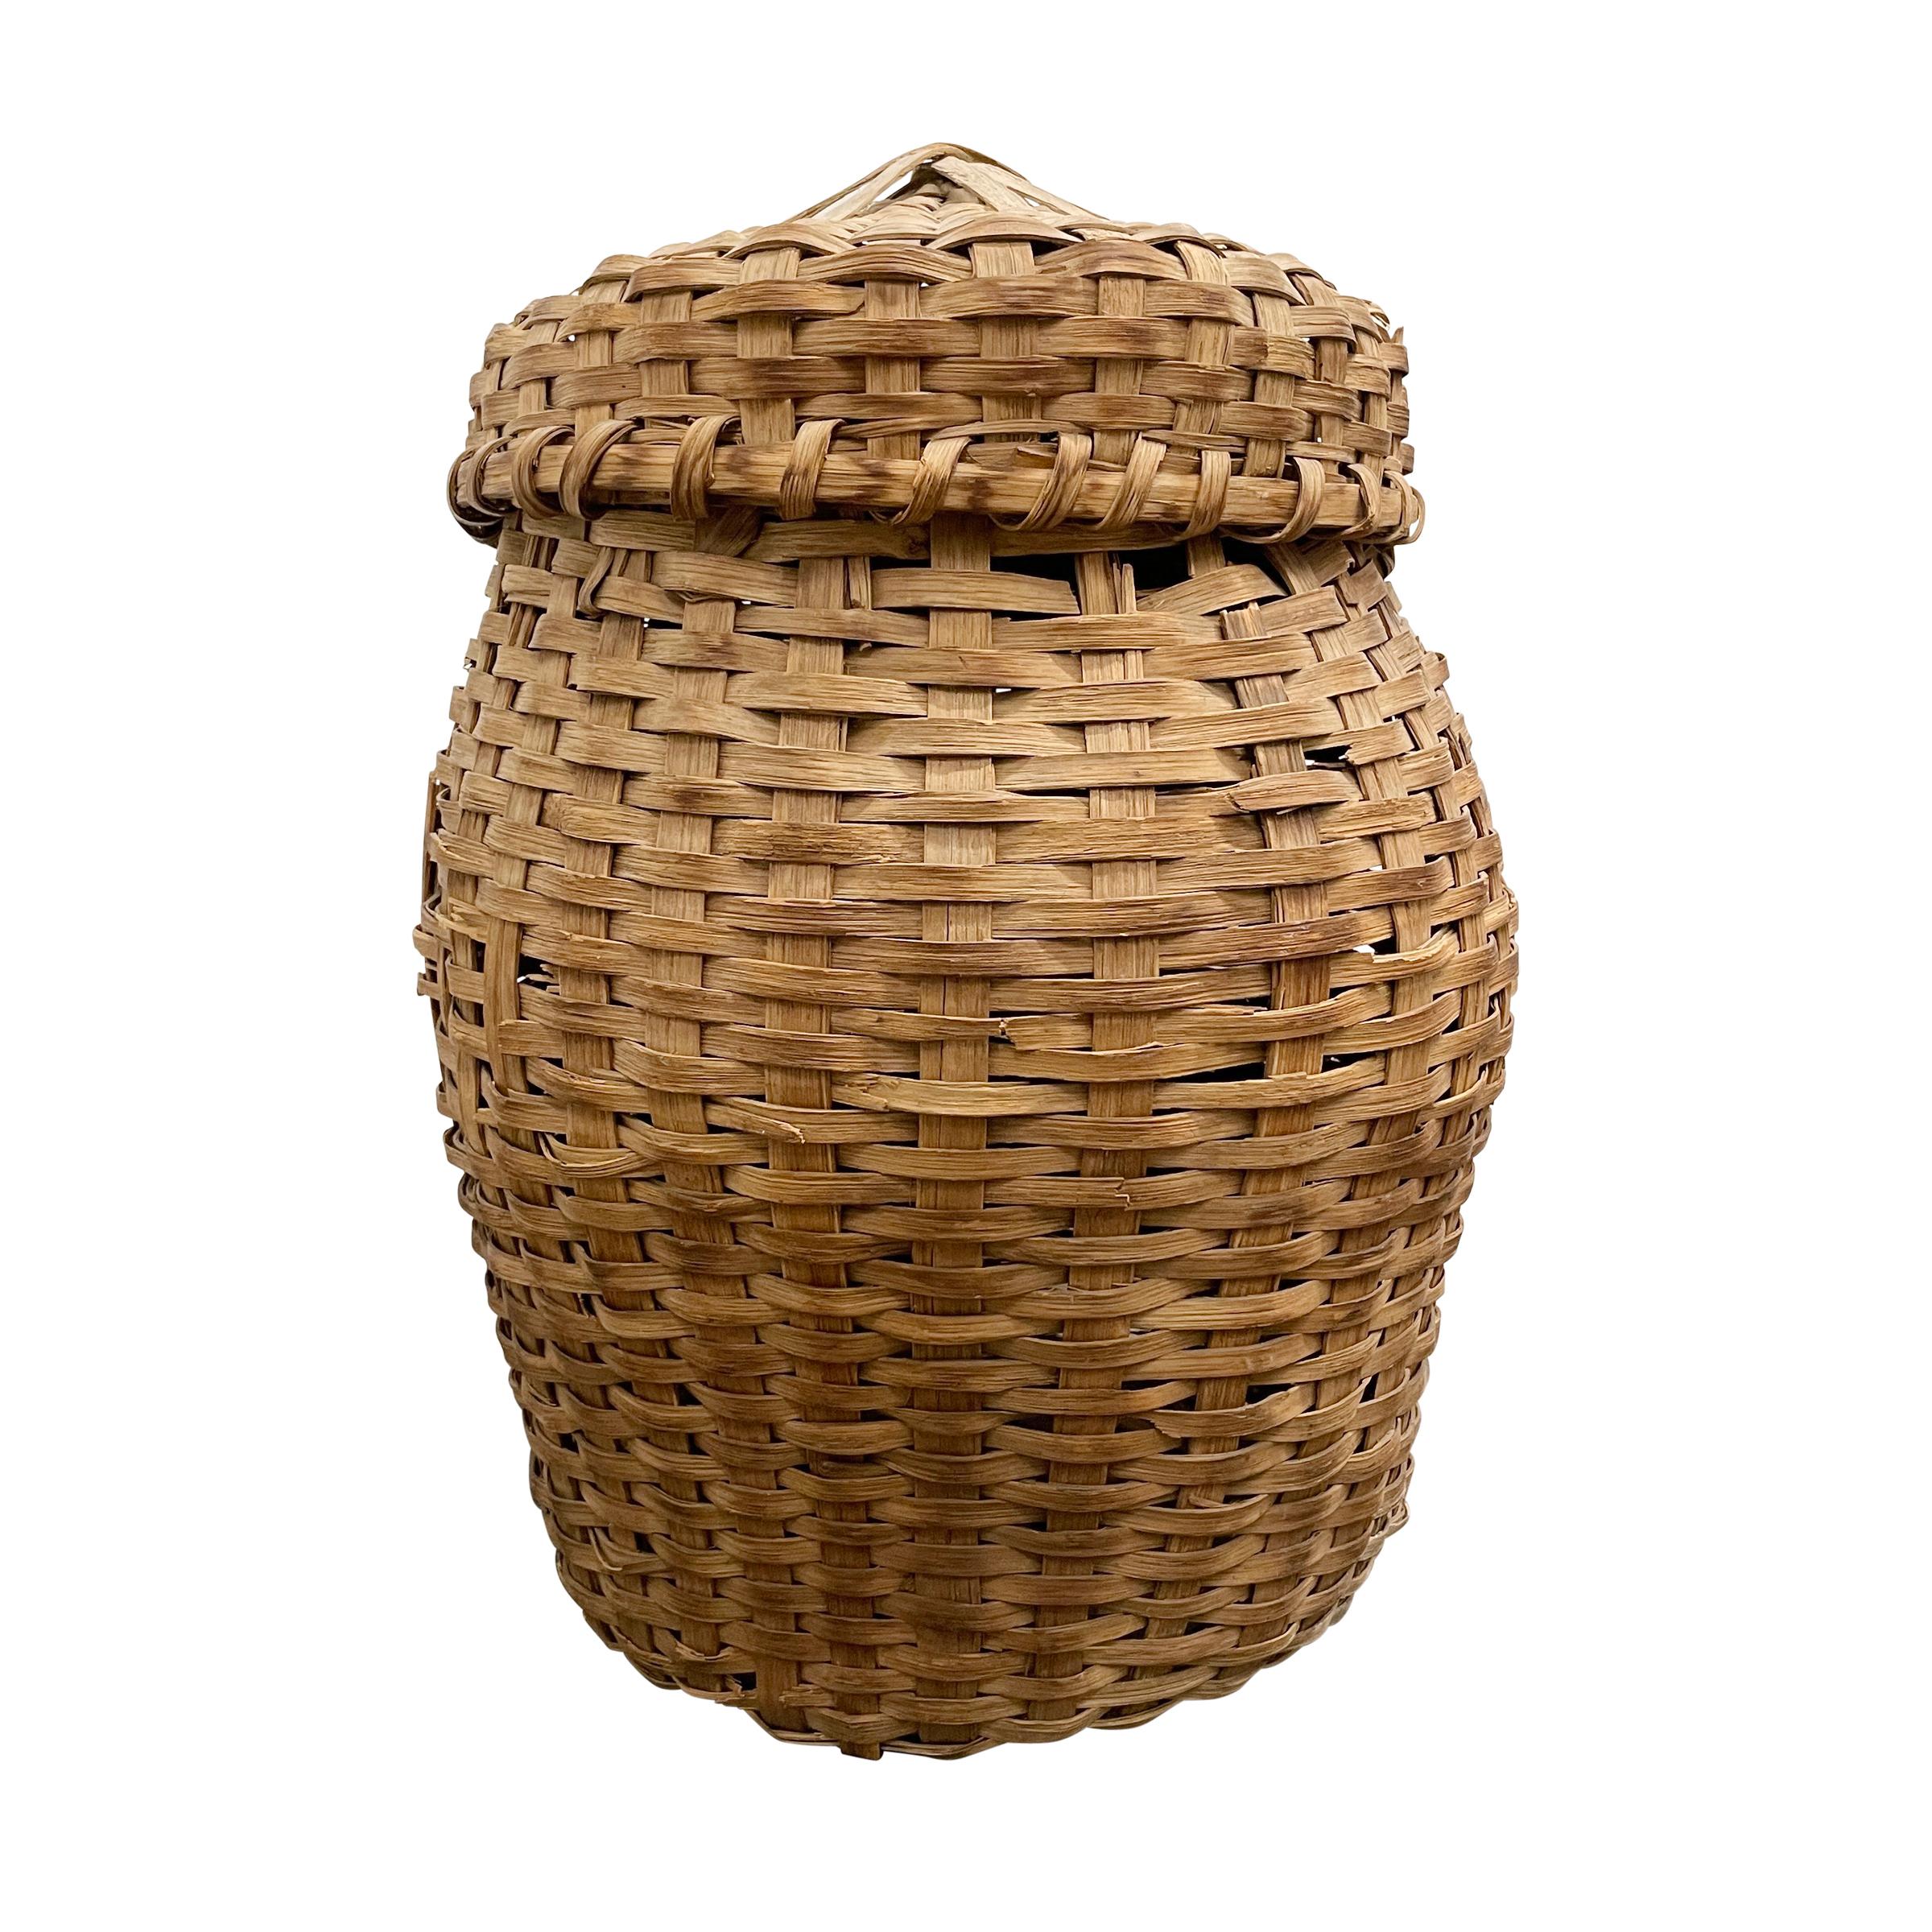 A wonderful late 19th century American oak splint feather basket with a beautiful hand-woven urn-form shape, and a lid. Every farm in America had a feather basket at one point, in which feathers from chicken, ducks, and geese were placed and stored